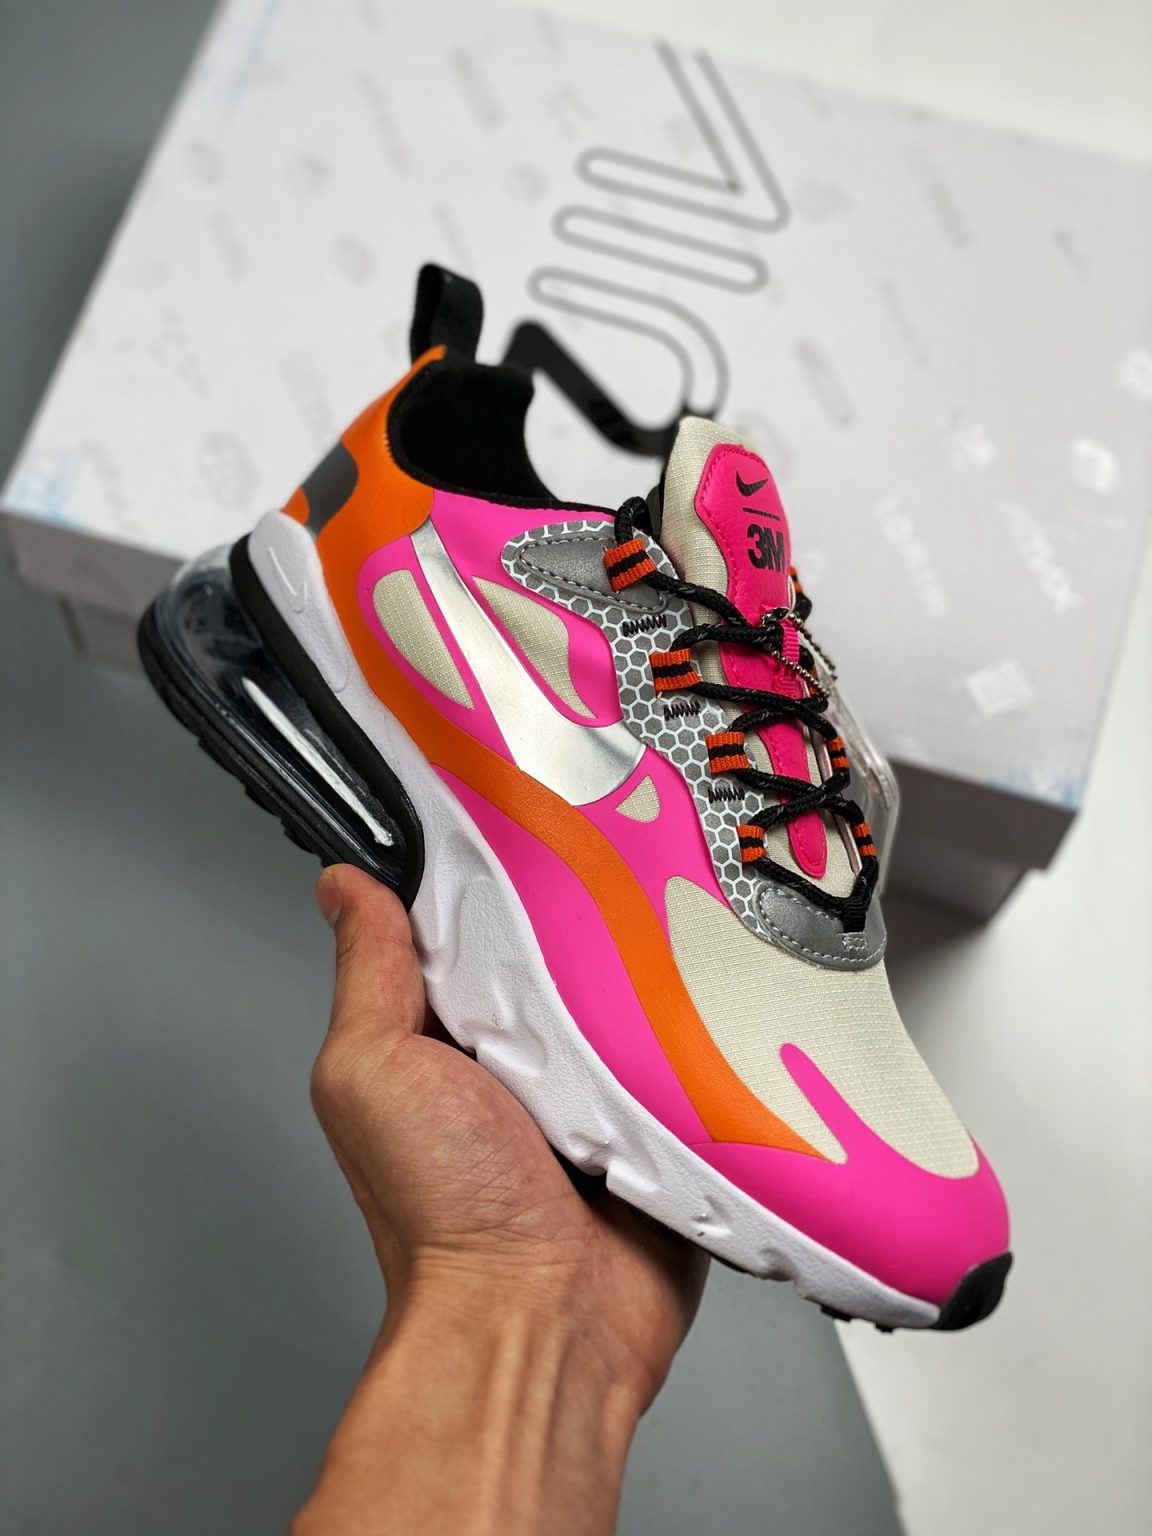 Nike Wmns Air Max 270 React Pink Orange Silver CT1834-100 For Sale â Sneaker Hello